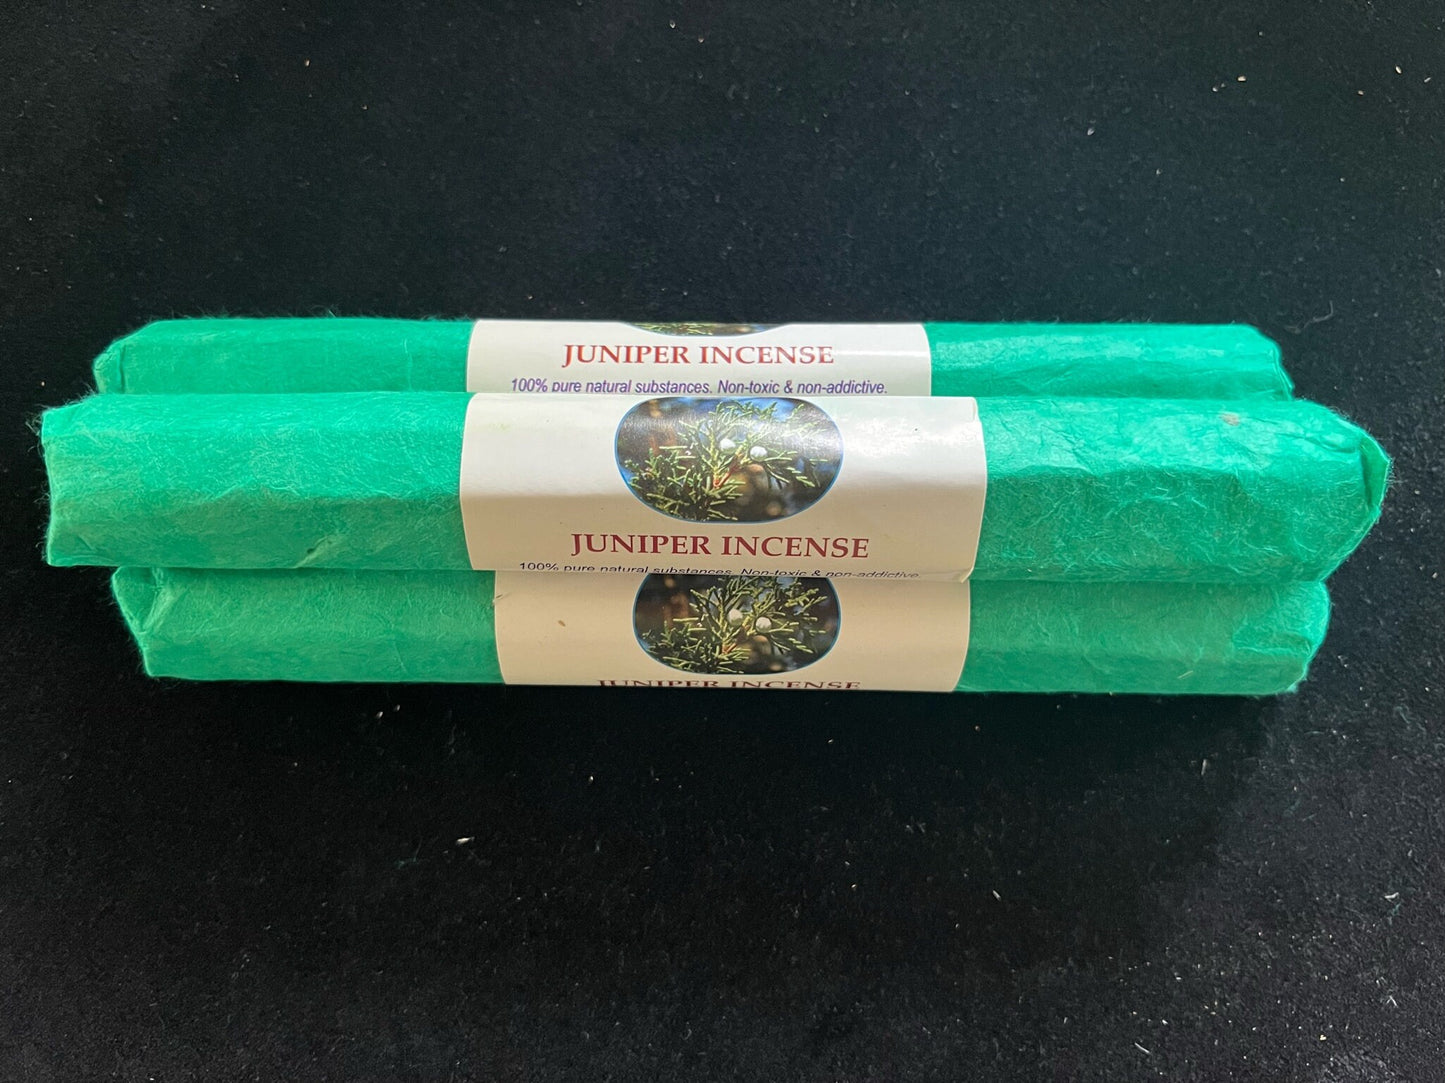 Rolls of Himalayan Arts Juniper Incense on a table. The incense is wrapped in green paper.